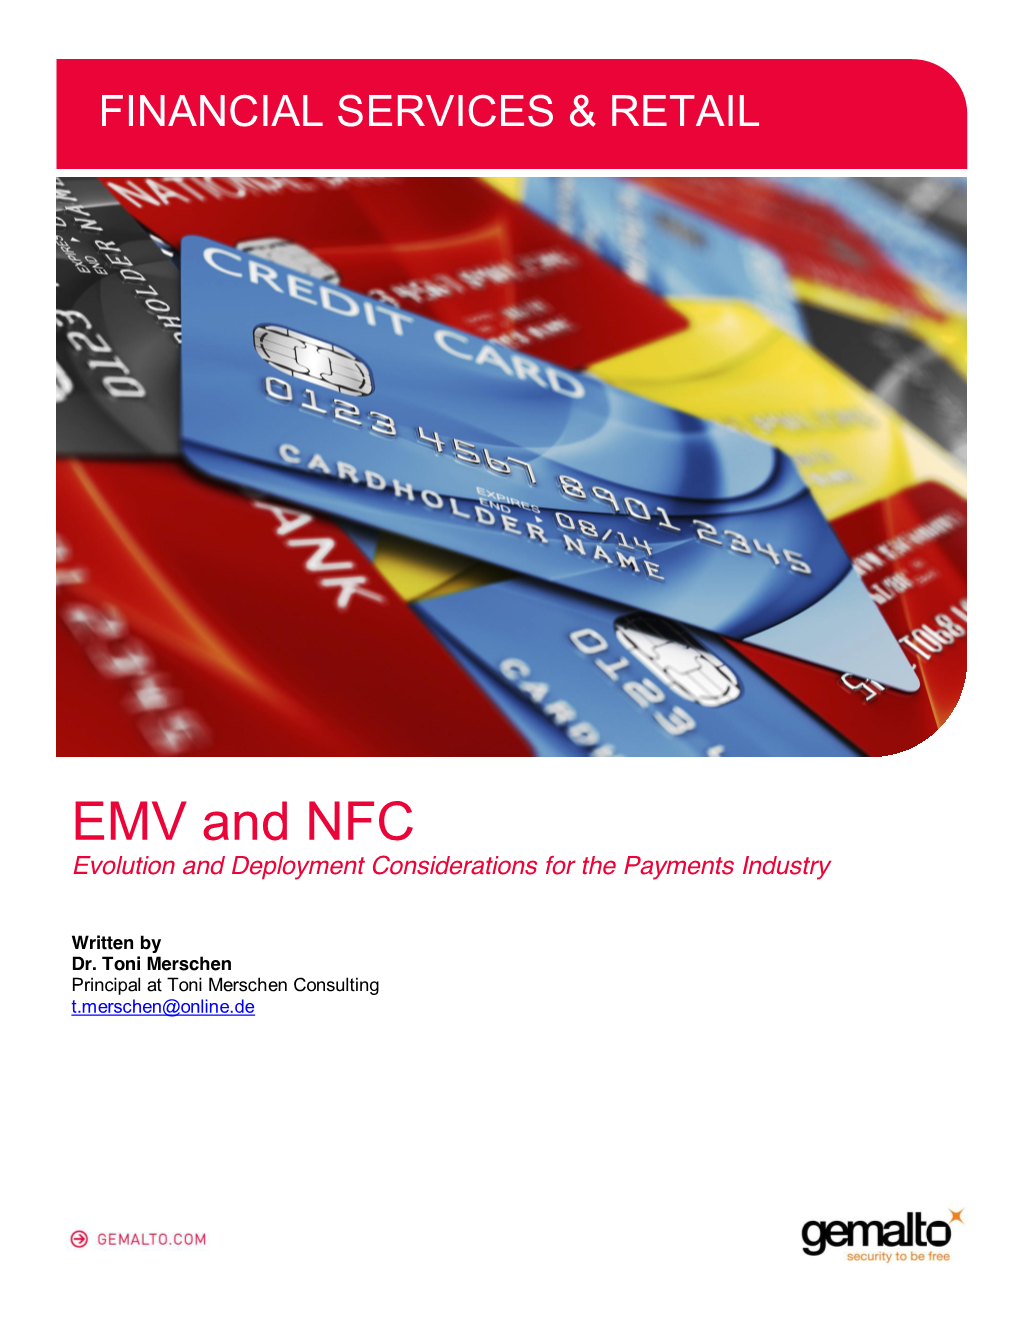 EMV and NFC Evolution and Deployment Considerations for the Payments Industry